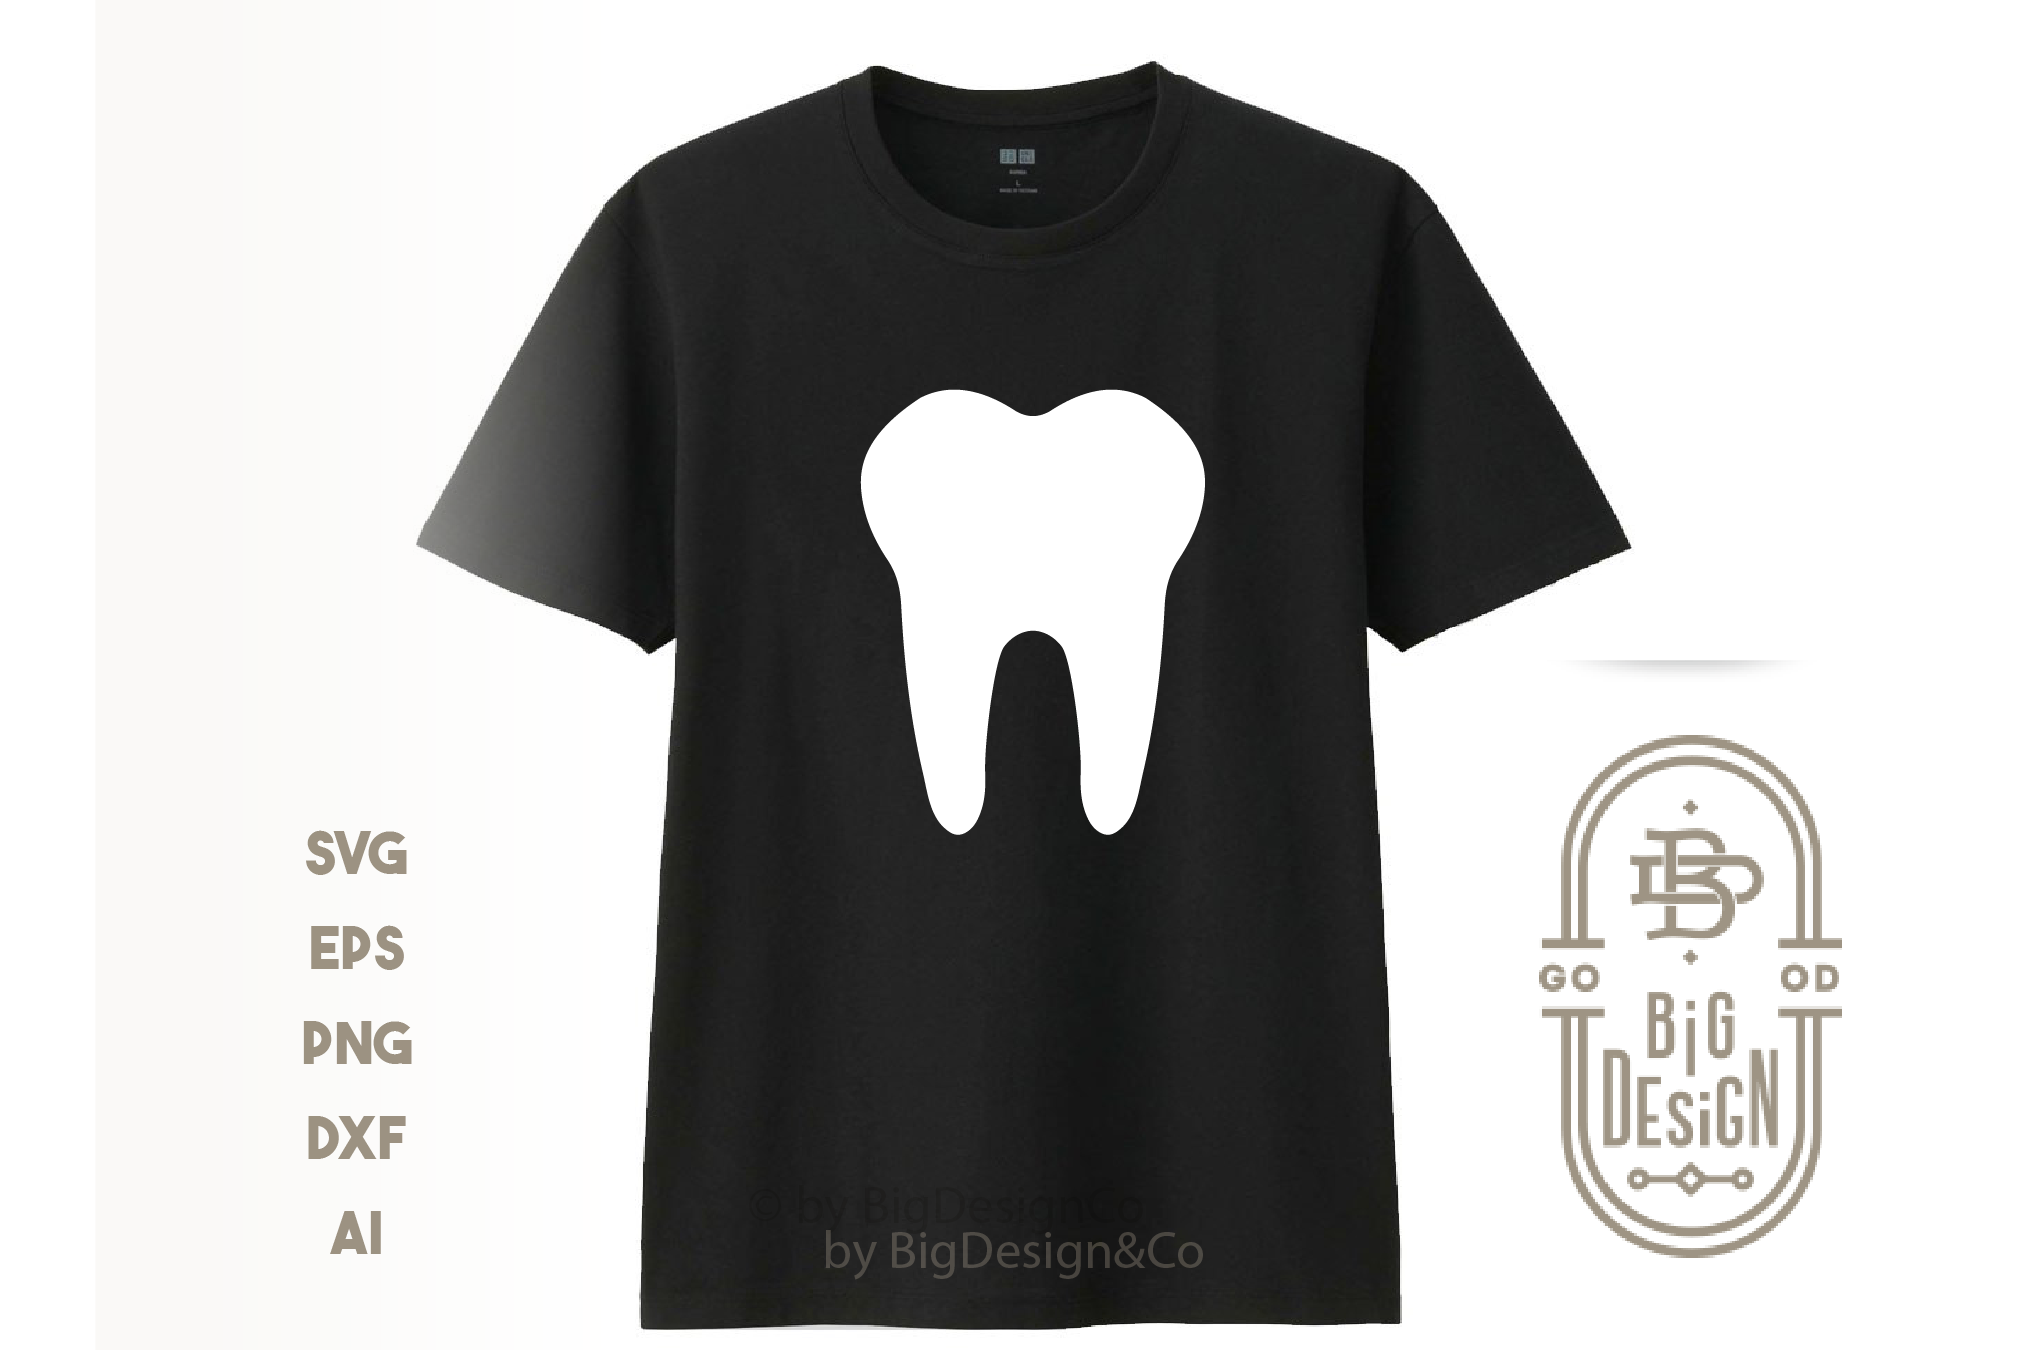 Download Free Svg Tooth Svg Cut File Tooth Silhouette Design Shopy